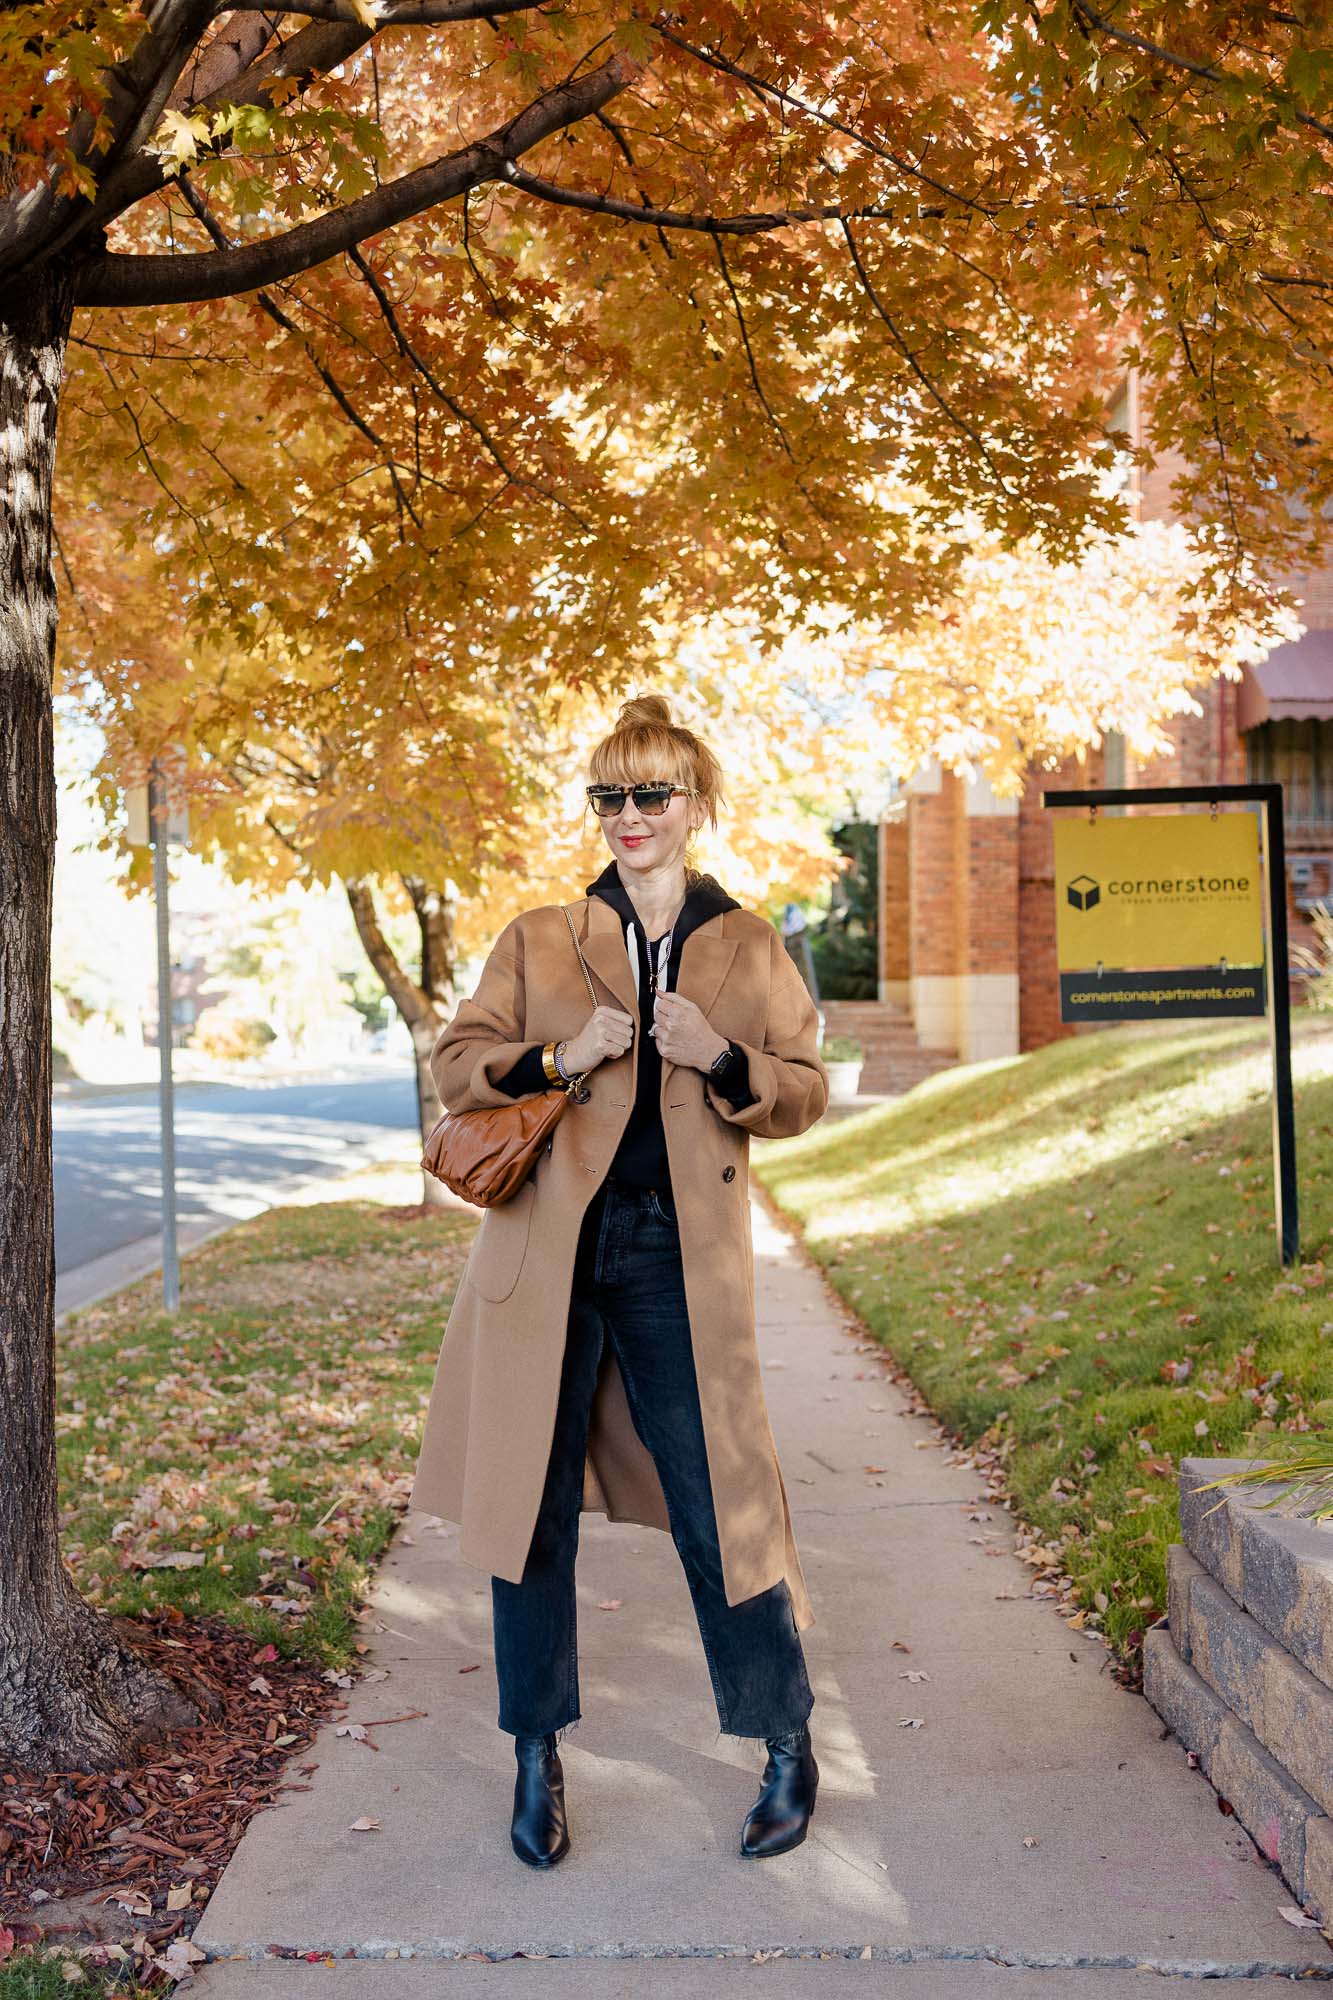 Wearing the Anine Bing Dylan coat in camel over a black rag and bone sweatshirt and black jeans.